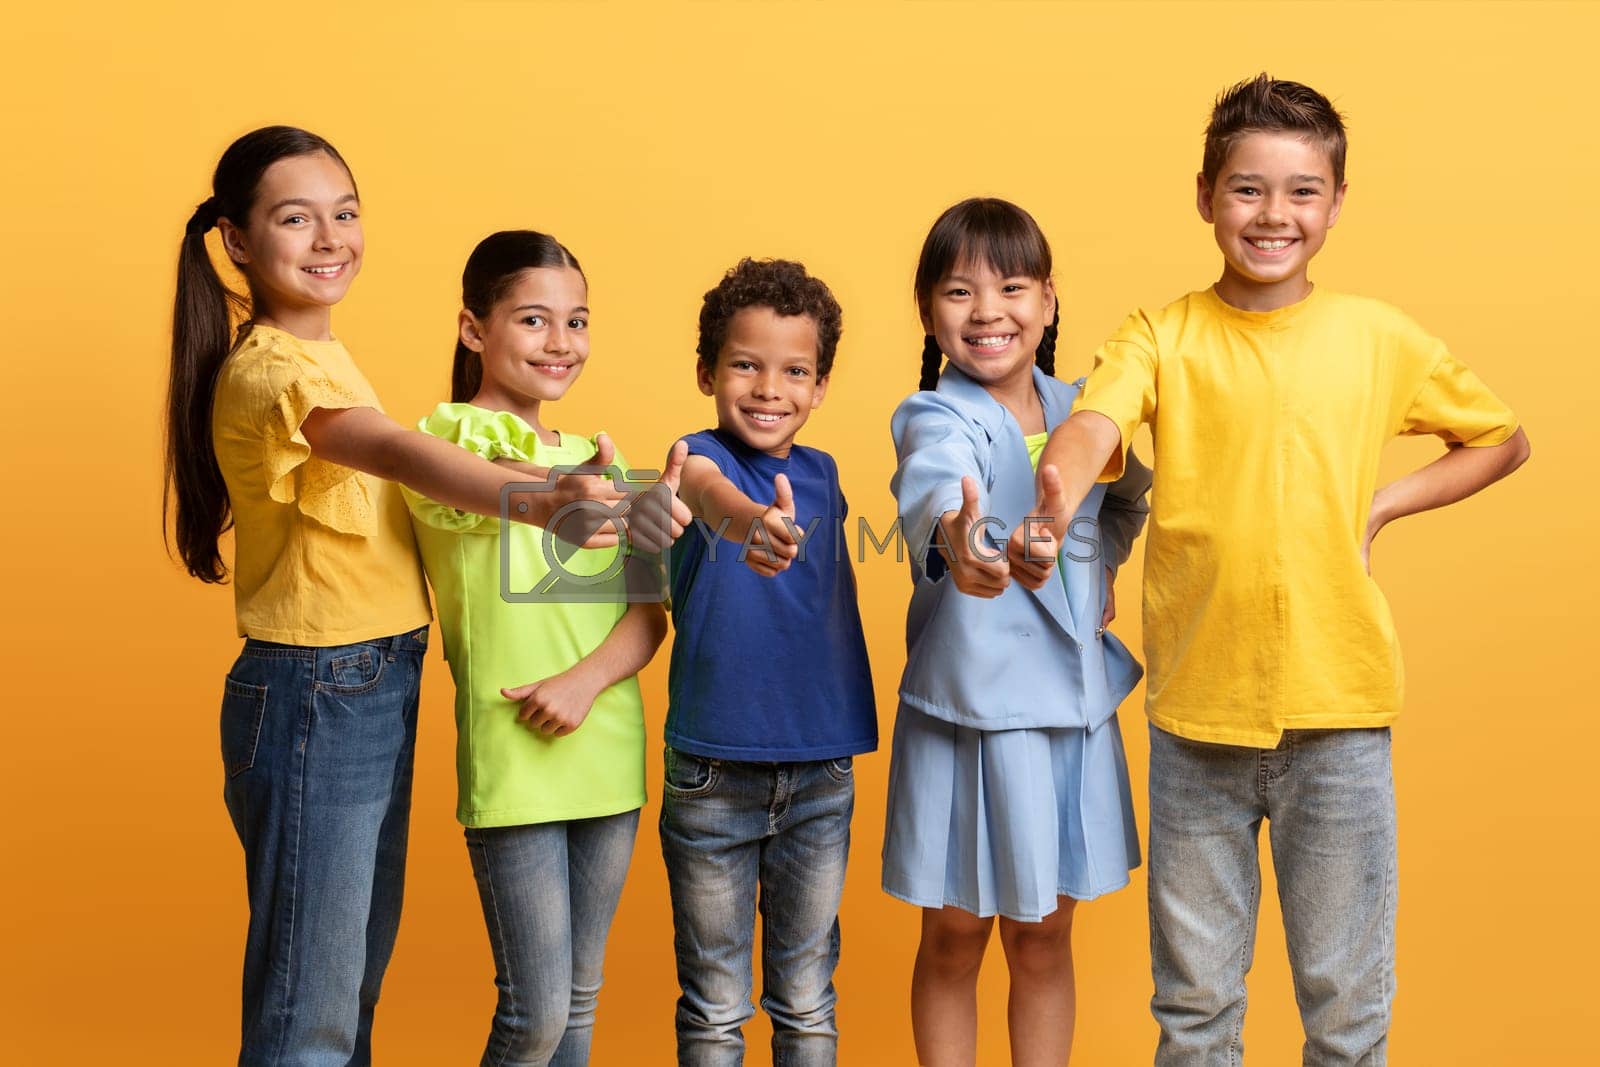 Royalty free image of Happy diverse multietnic children showing thumb up, yellow background by Prostock-studio